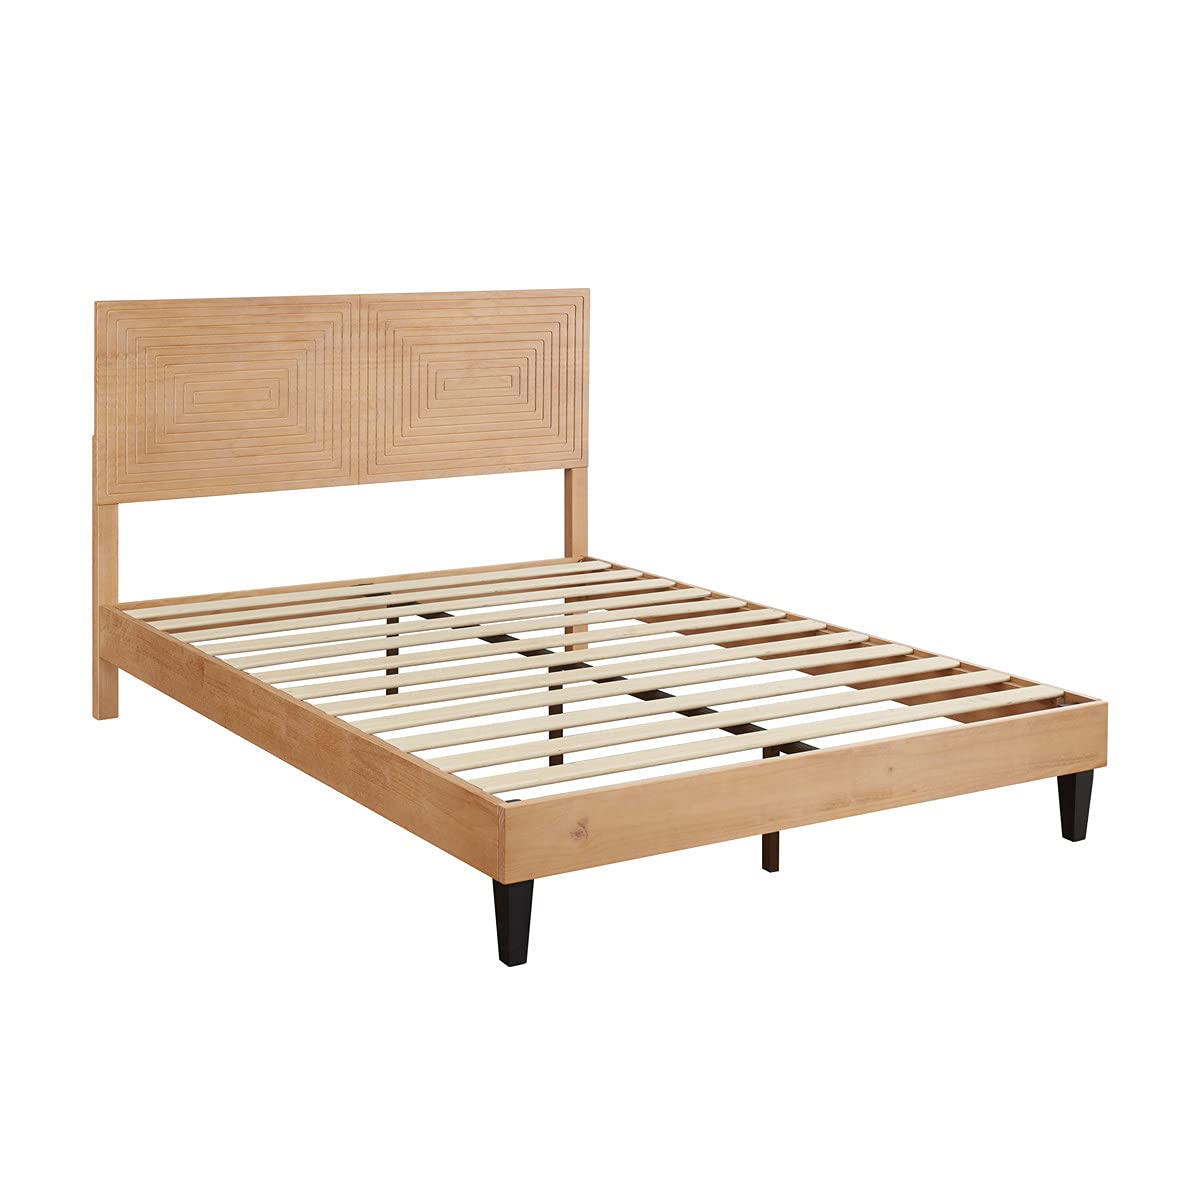 MUSEHOMEINC Mid Century Modern Solid Wood Platform Bed,Queen Size Bed Frame with Adjustable Height Headboard, Wood Slat Support Bed Frame, Bed Frame